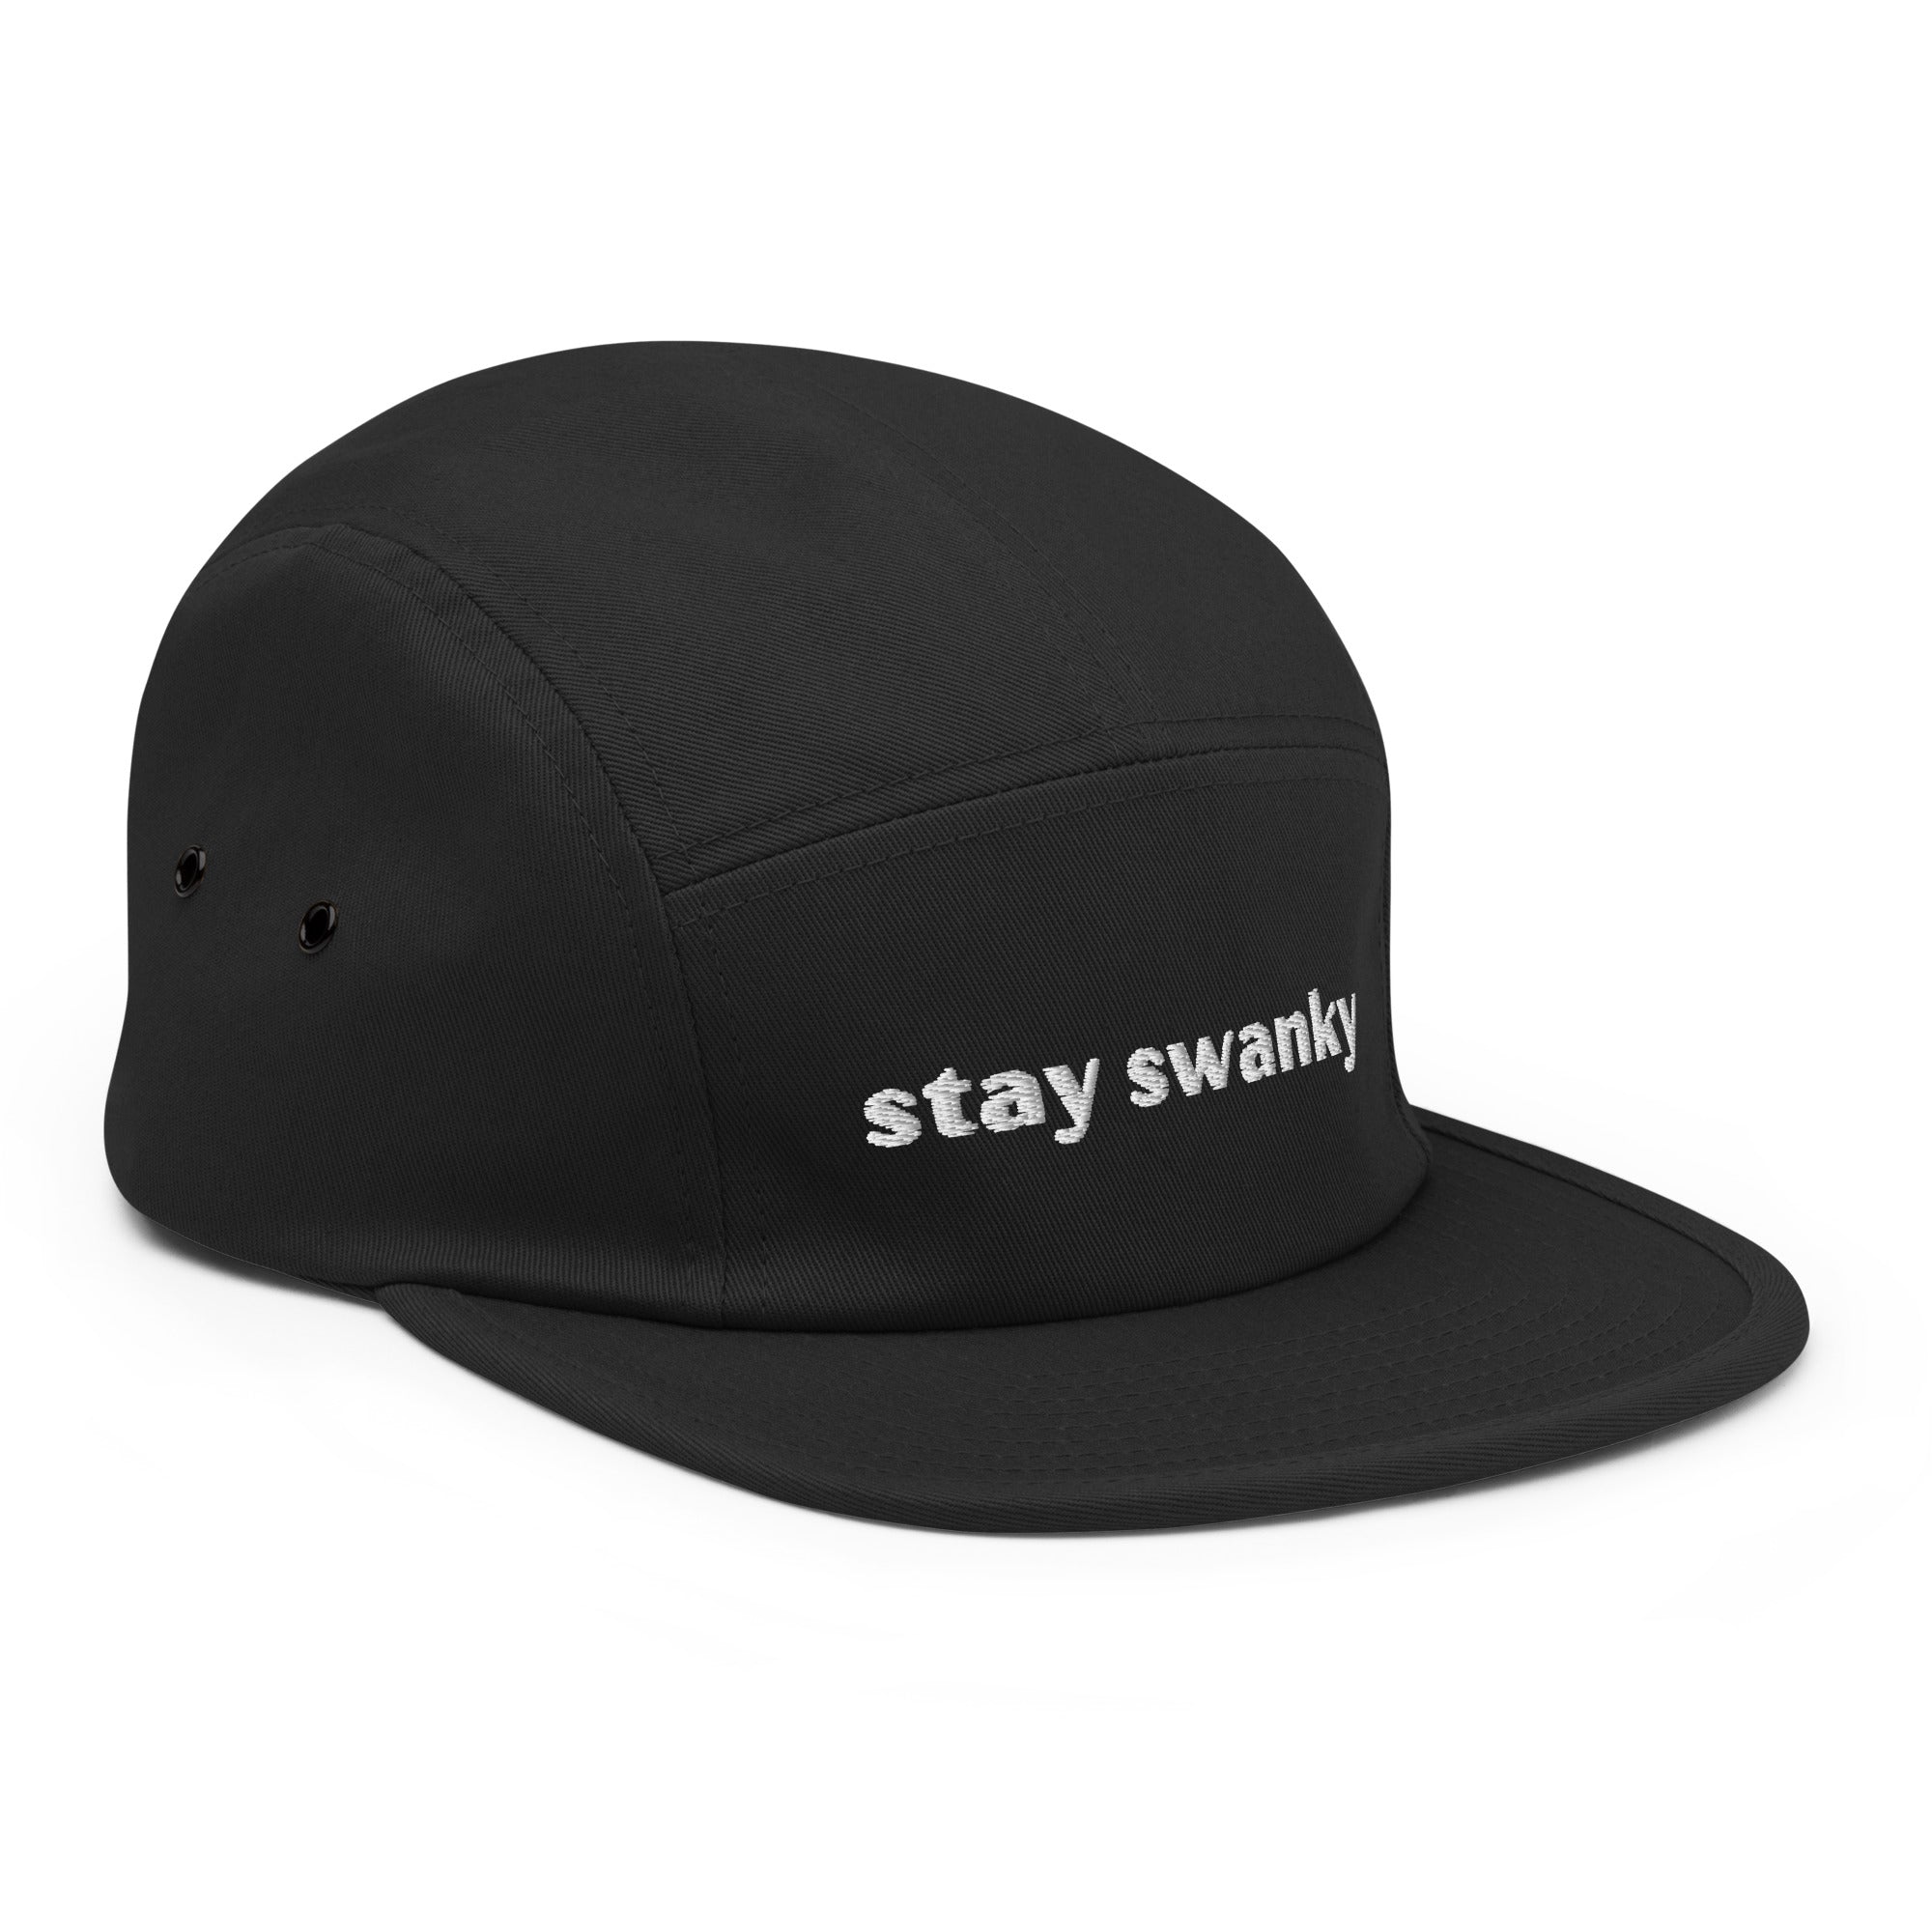 Stay Swanky Five Panel Camp Hat